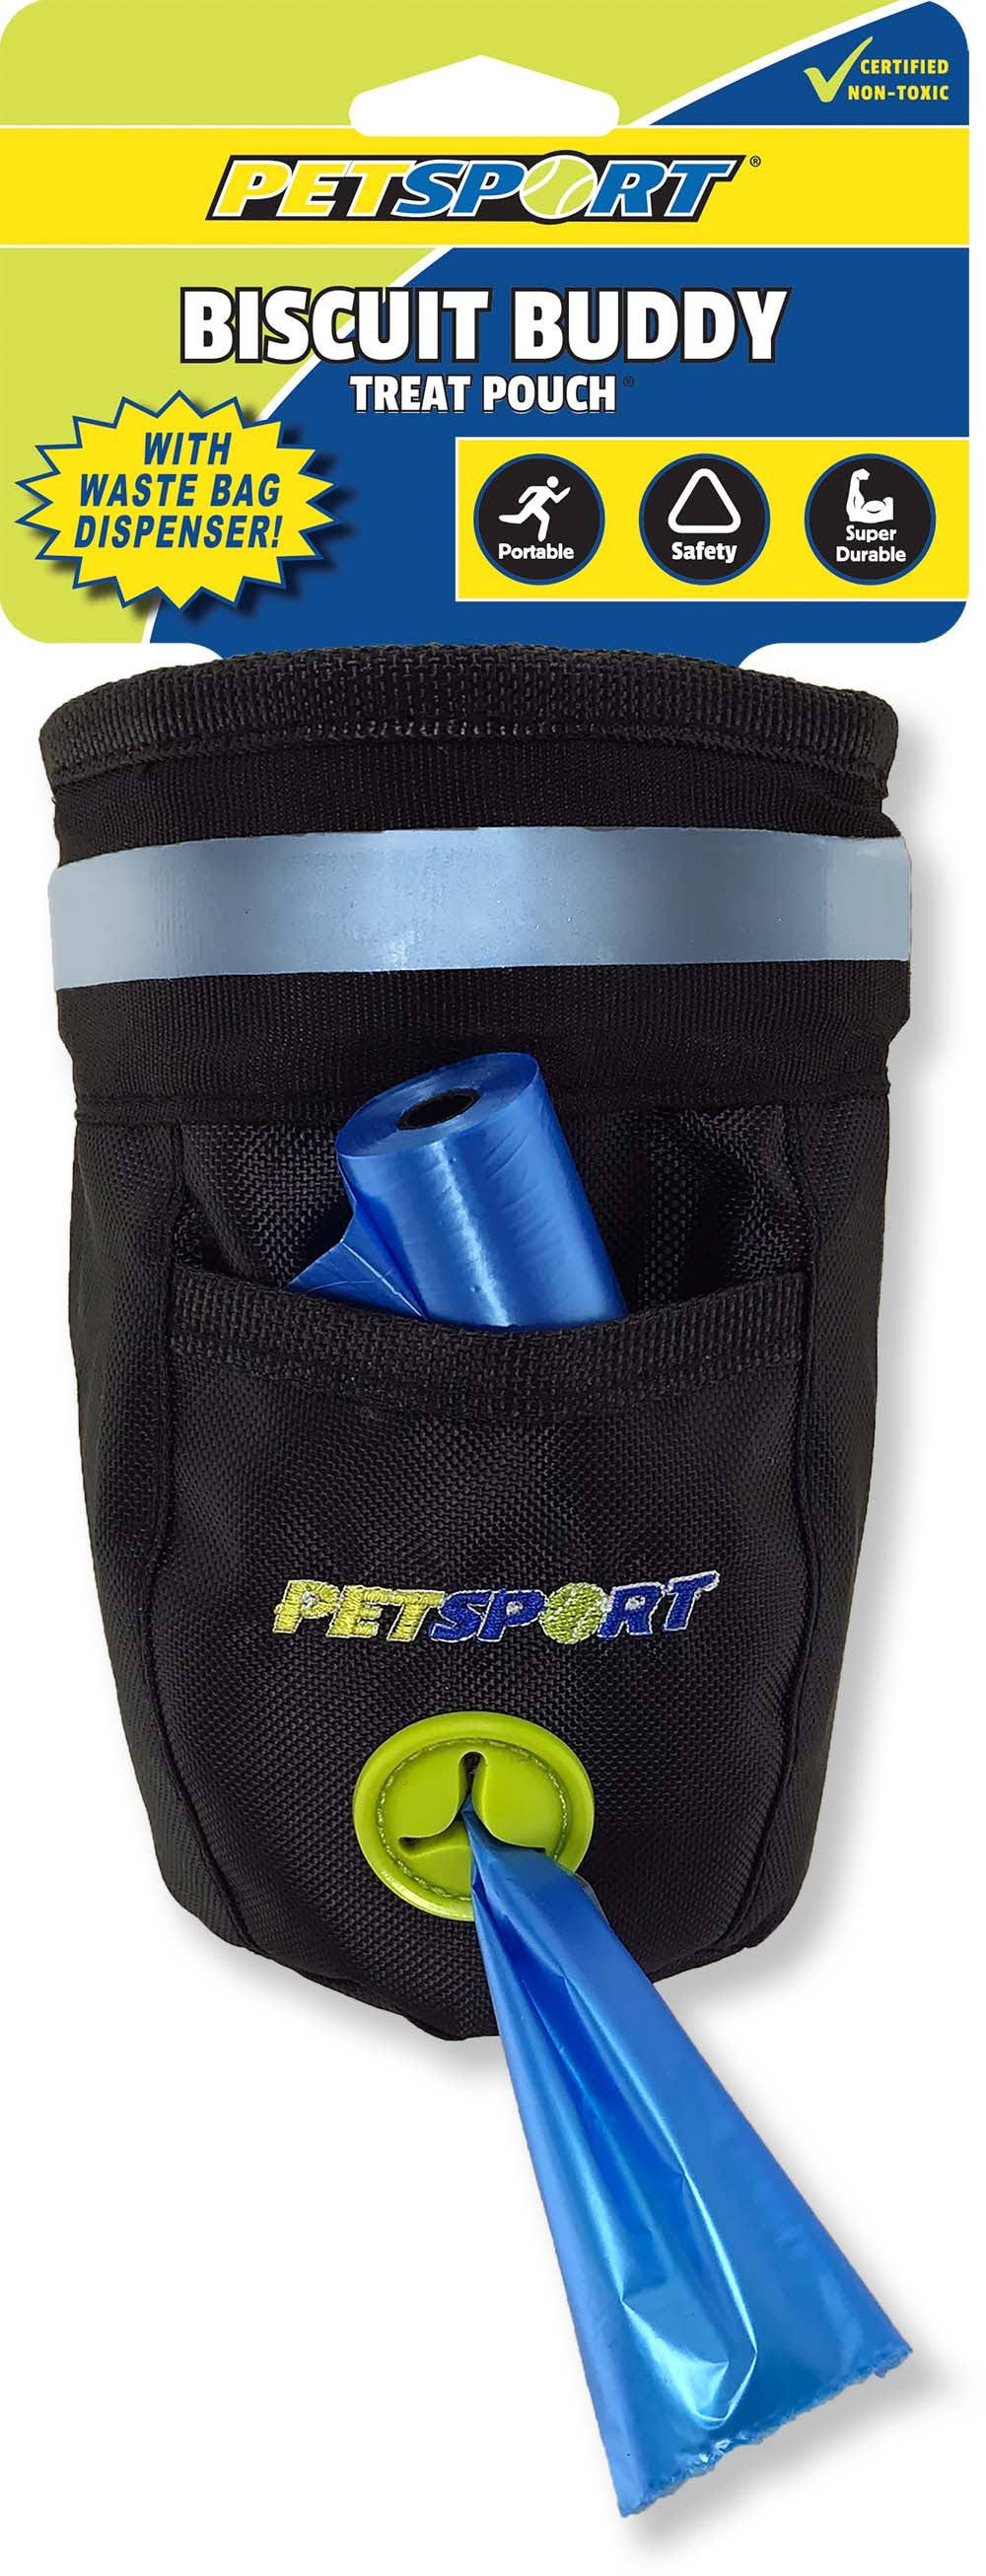 Petsport Biscuit Buddy Treat Pouch